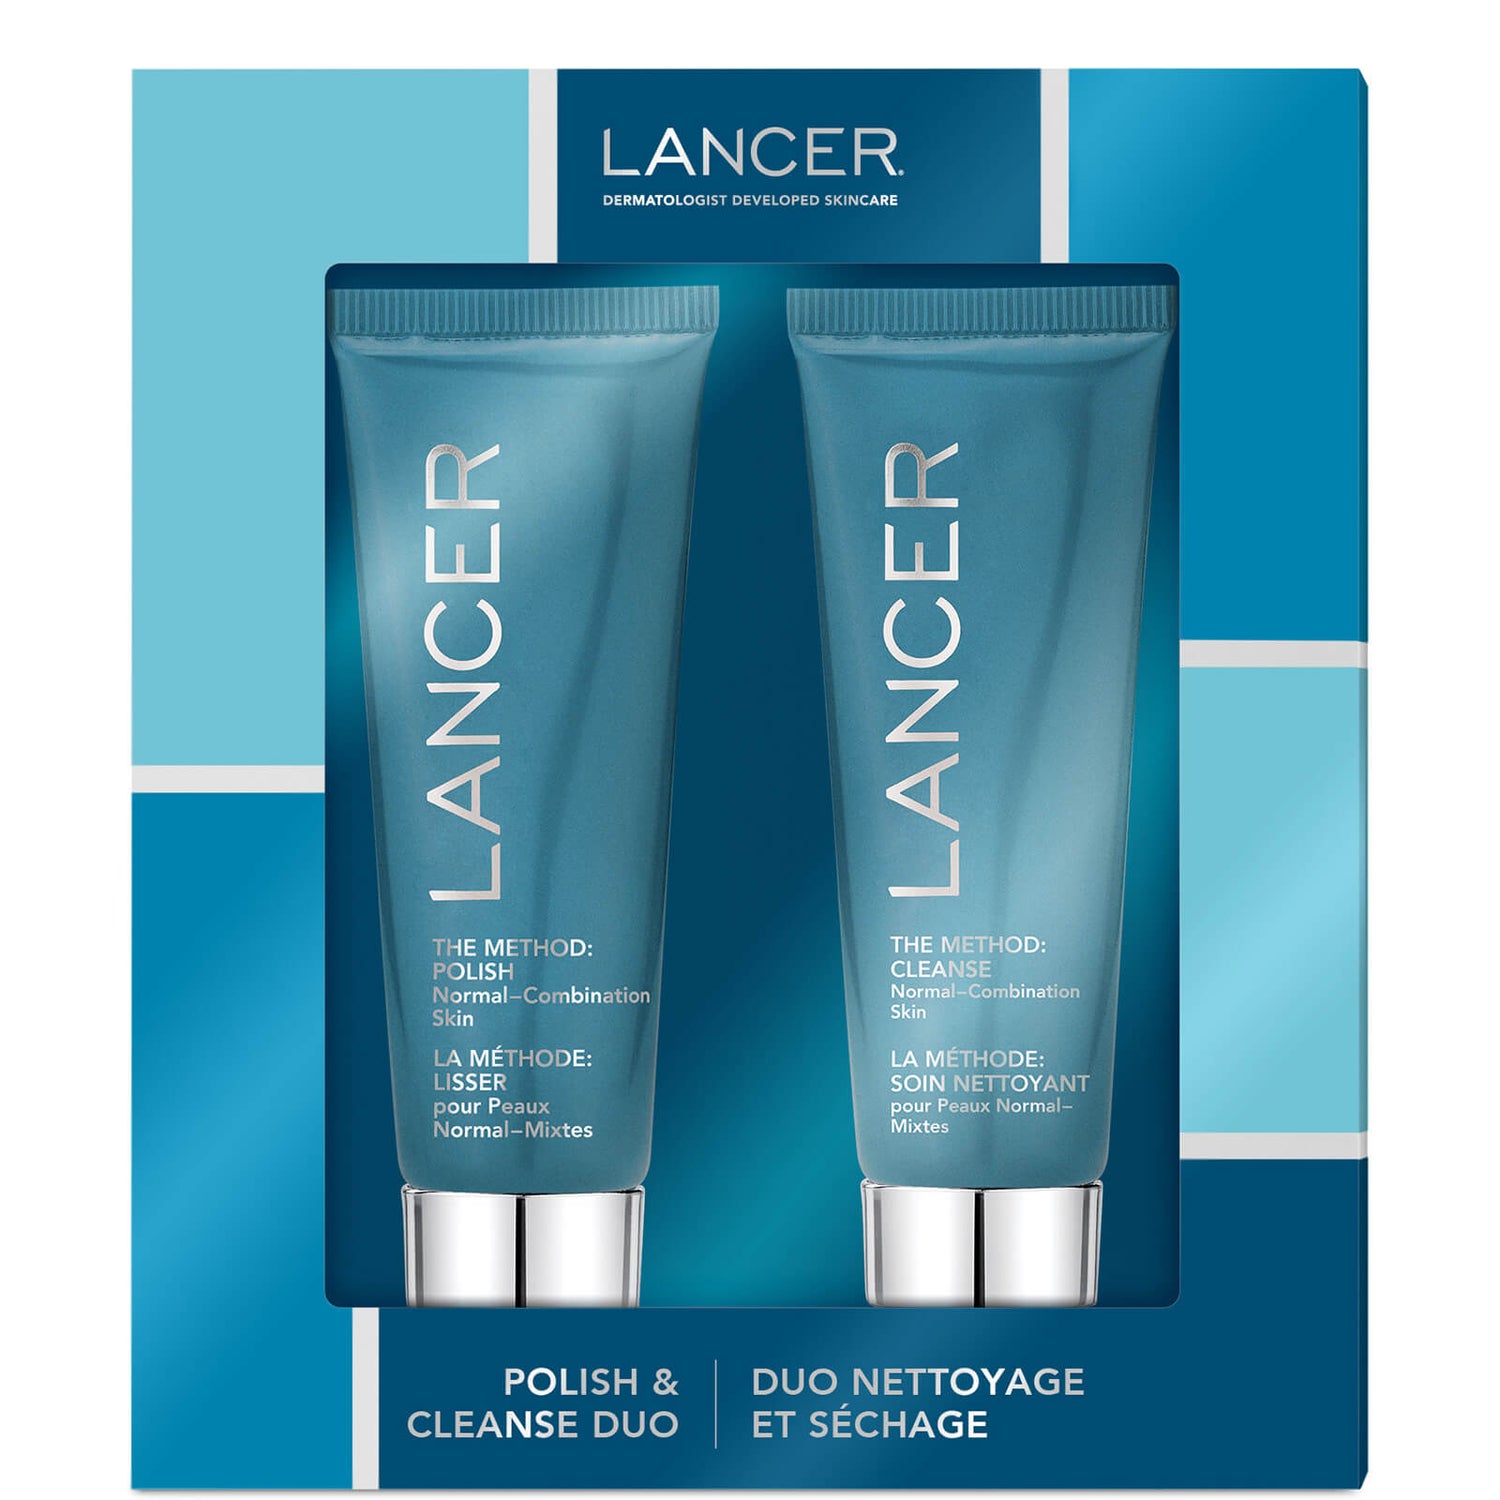 Lancer Skincare and Cleanse Duo